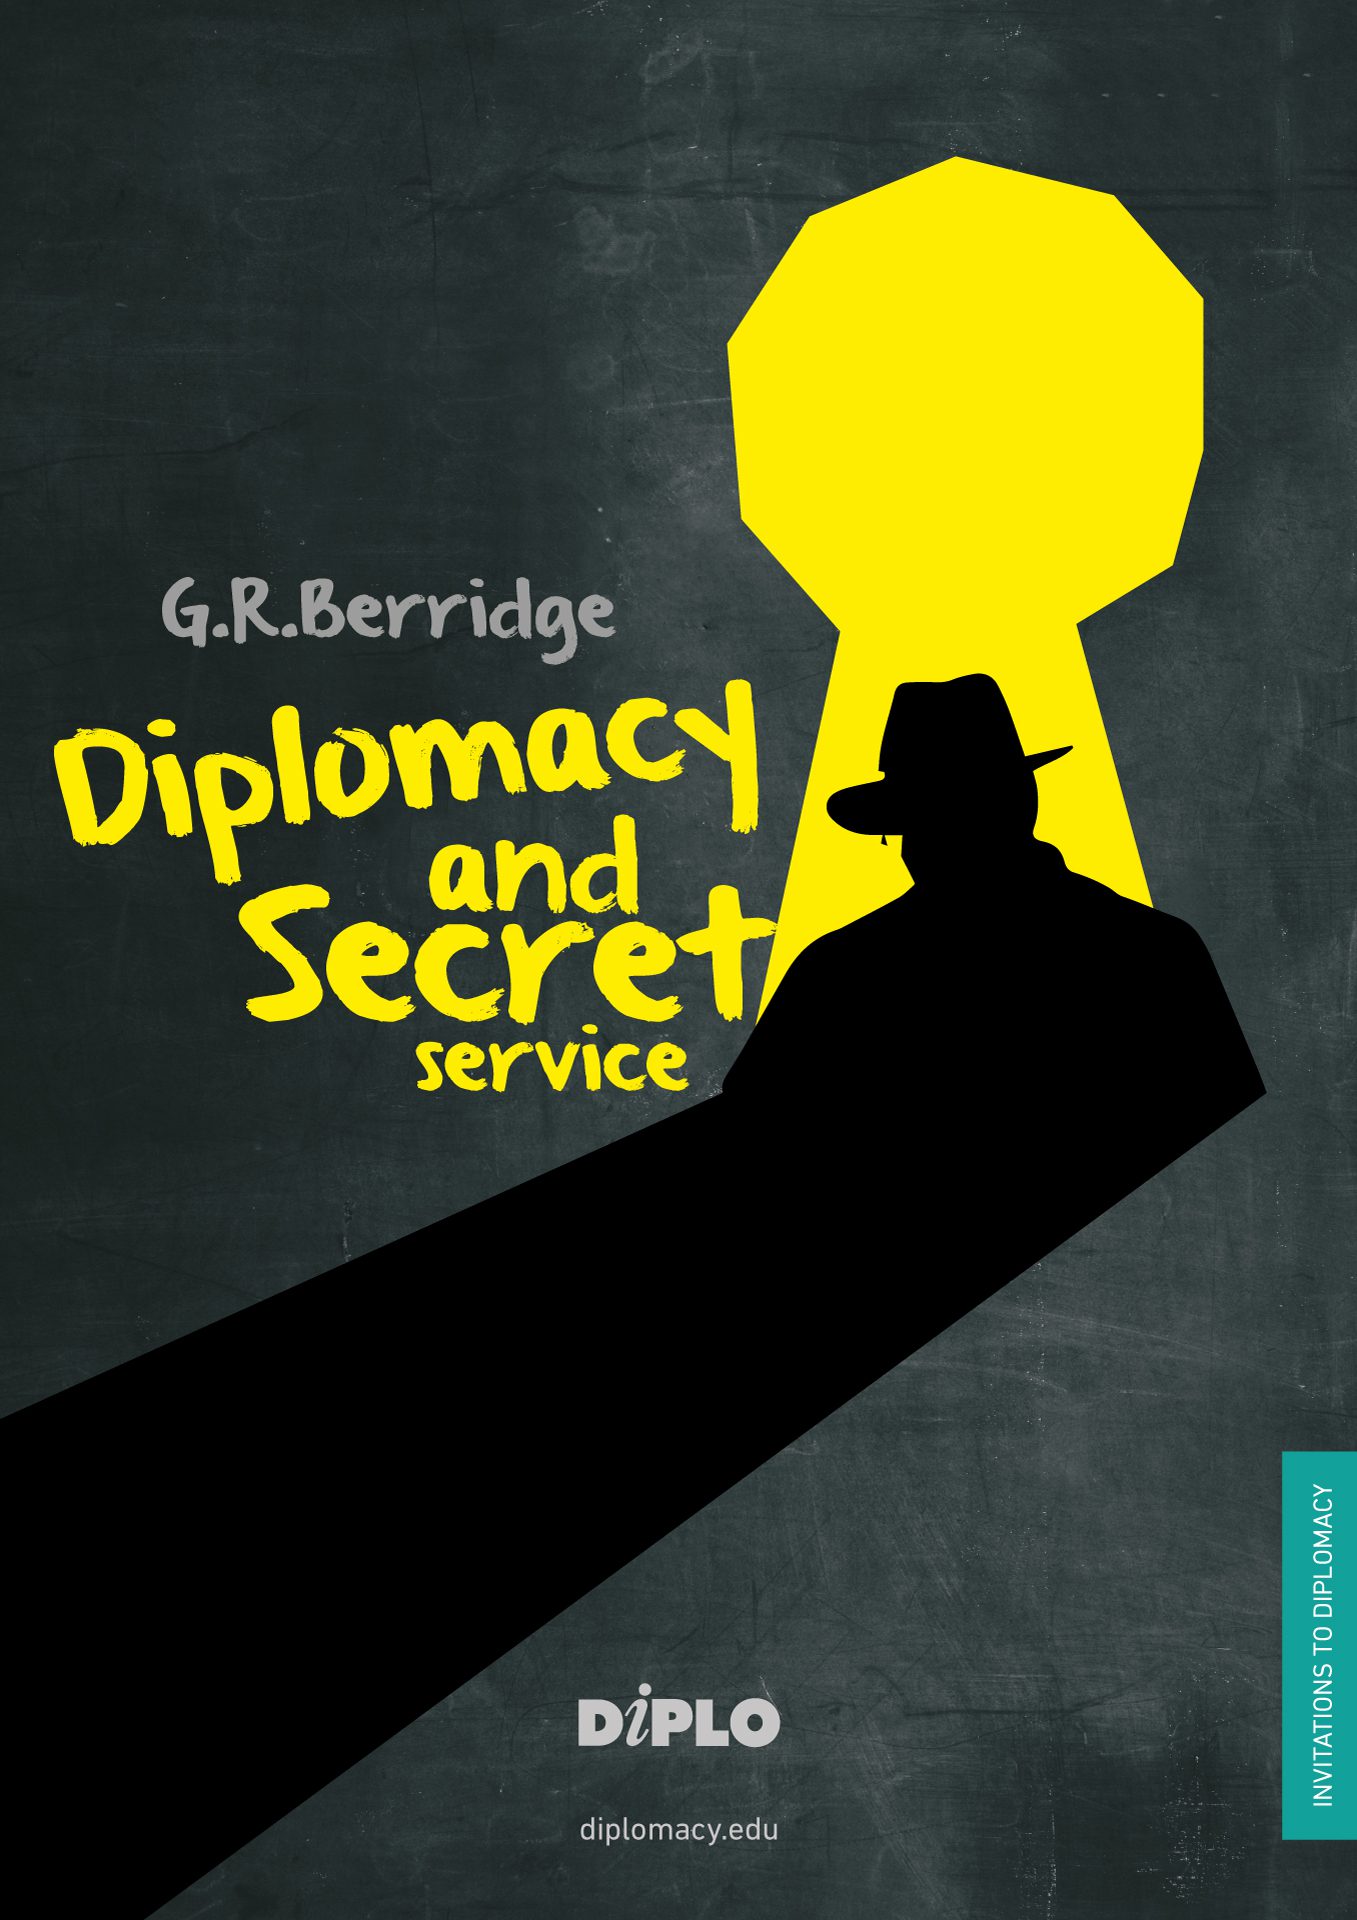 Book cover showing a silhouette of a man with a hat in front of the key hole